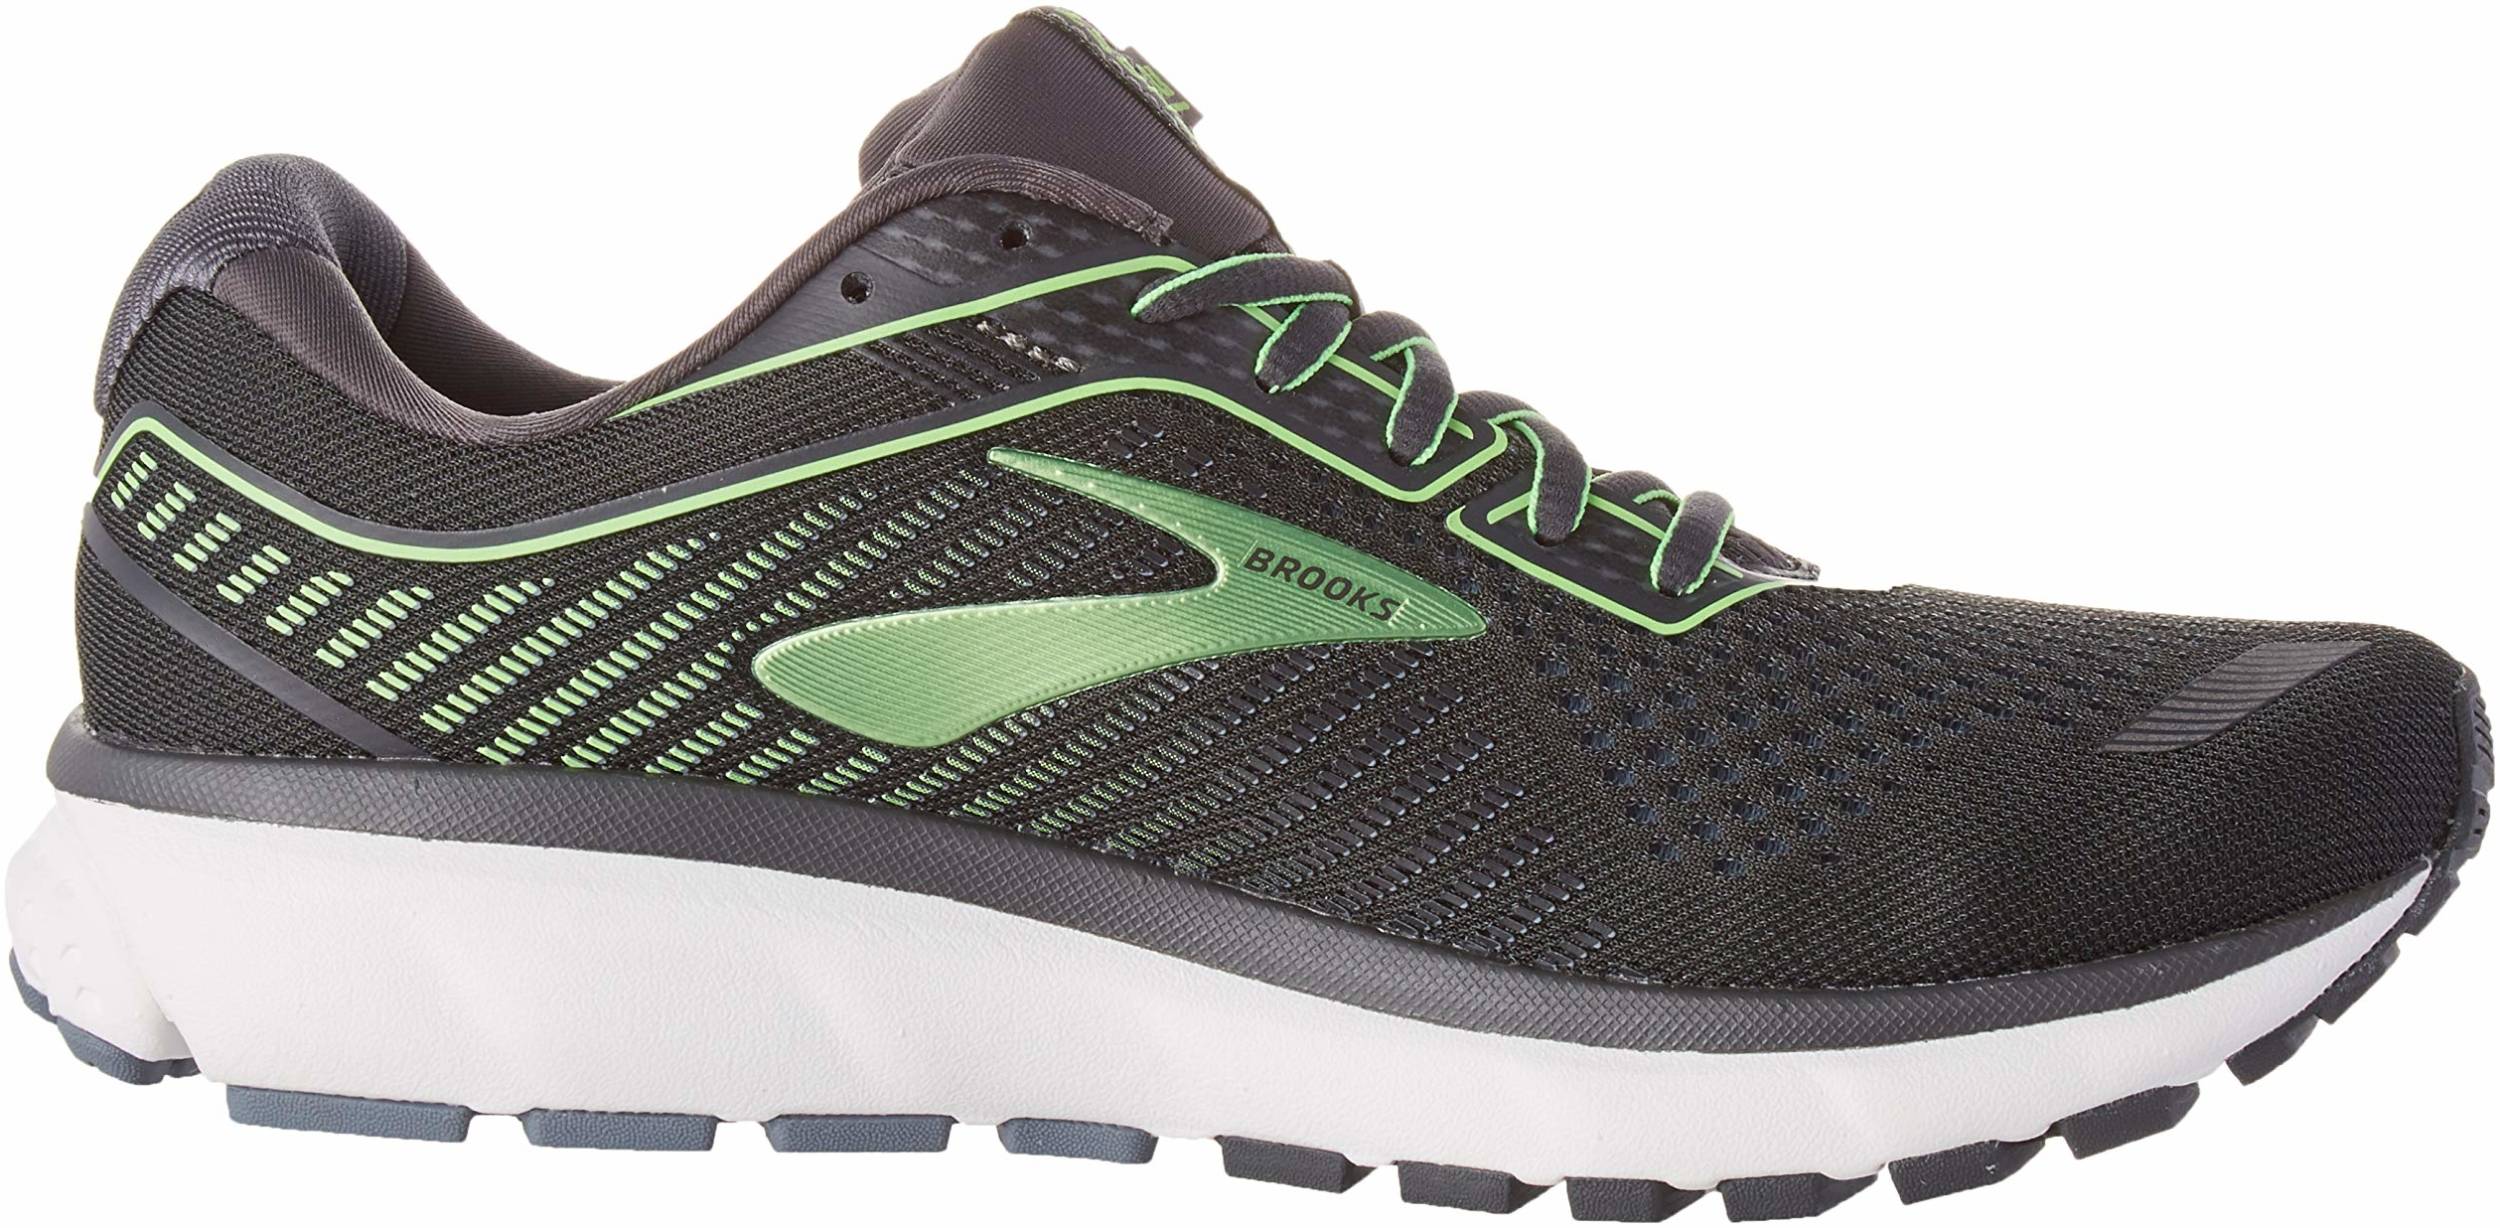 Save 46% on Neutral Running Shoes (2028 